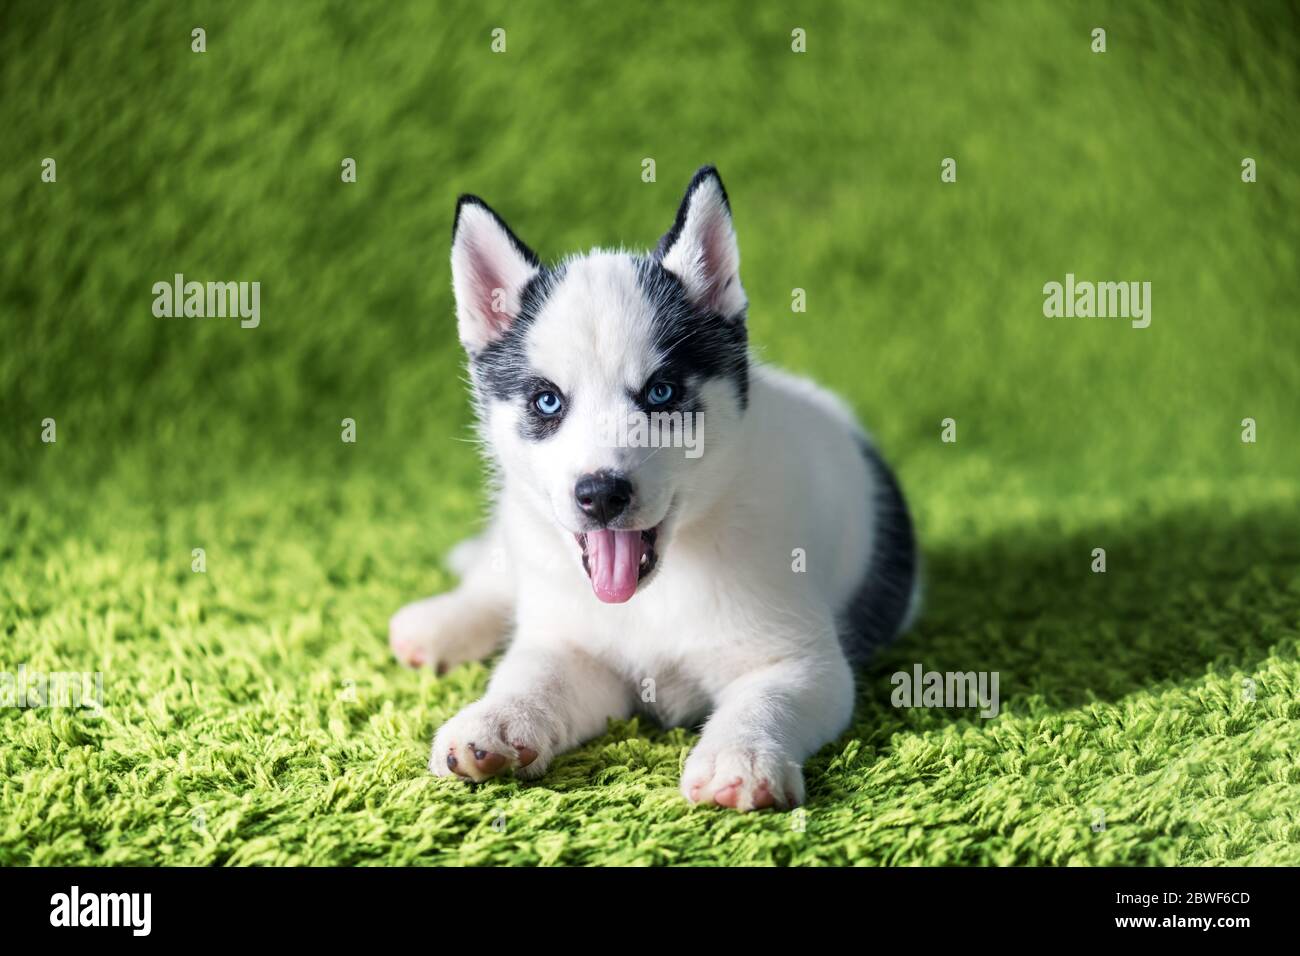 A small white dog puppy breed siberian husky with beautiful blue eyes lays on green carpet. Dogs and pet photography Stock Photo